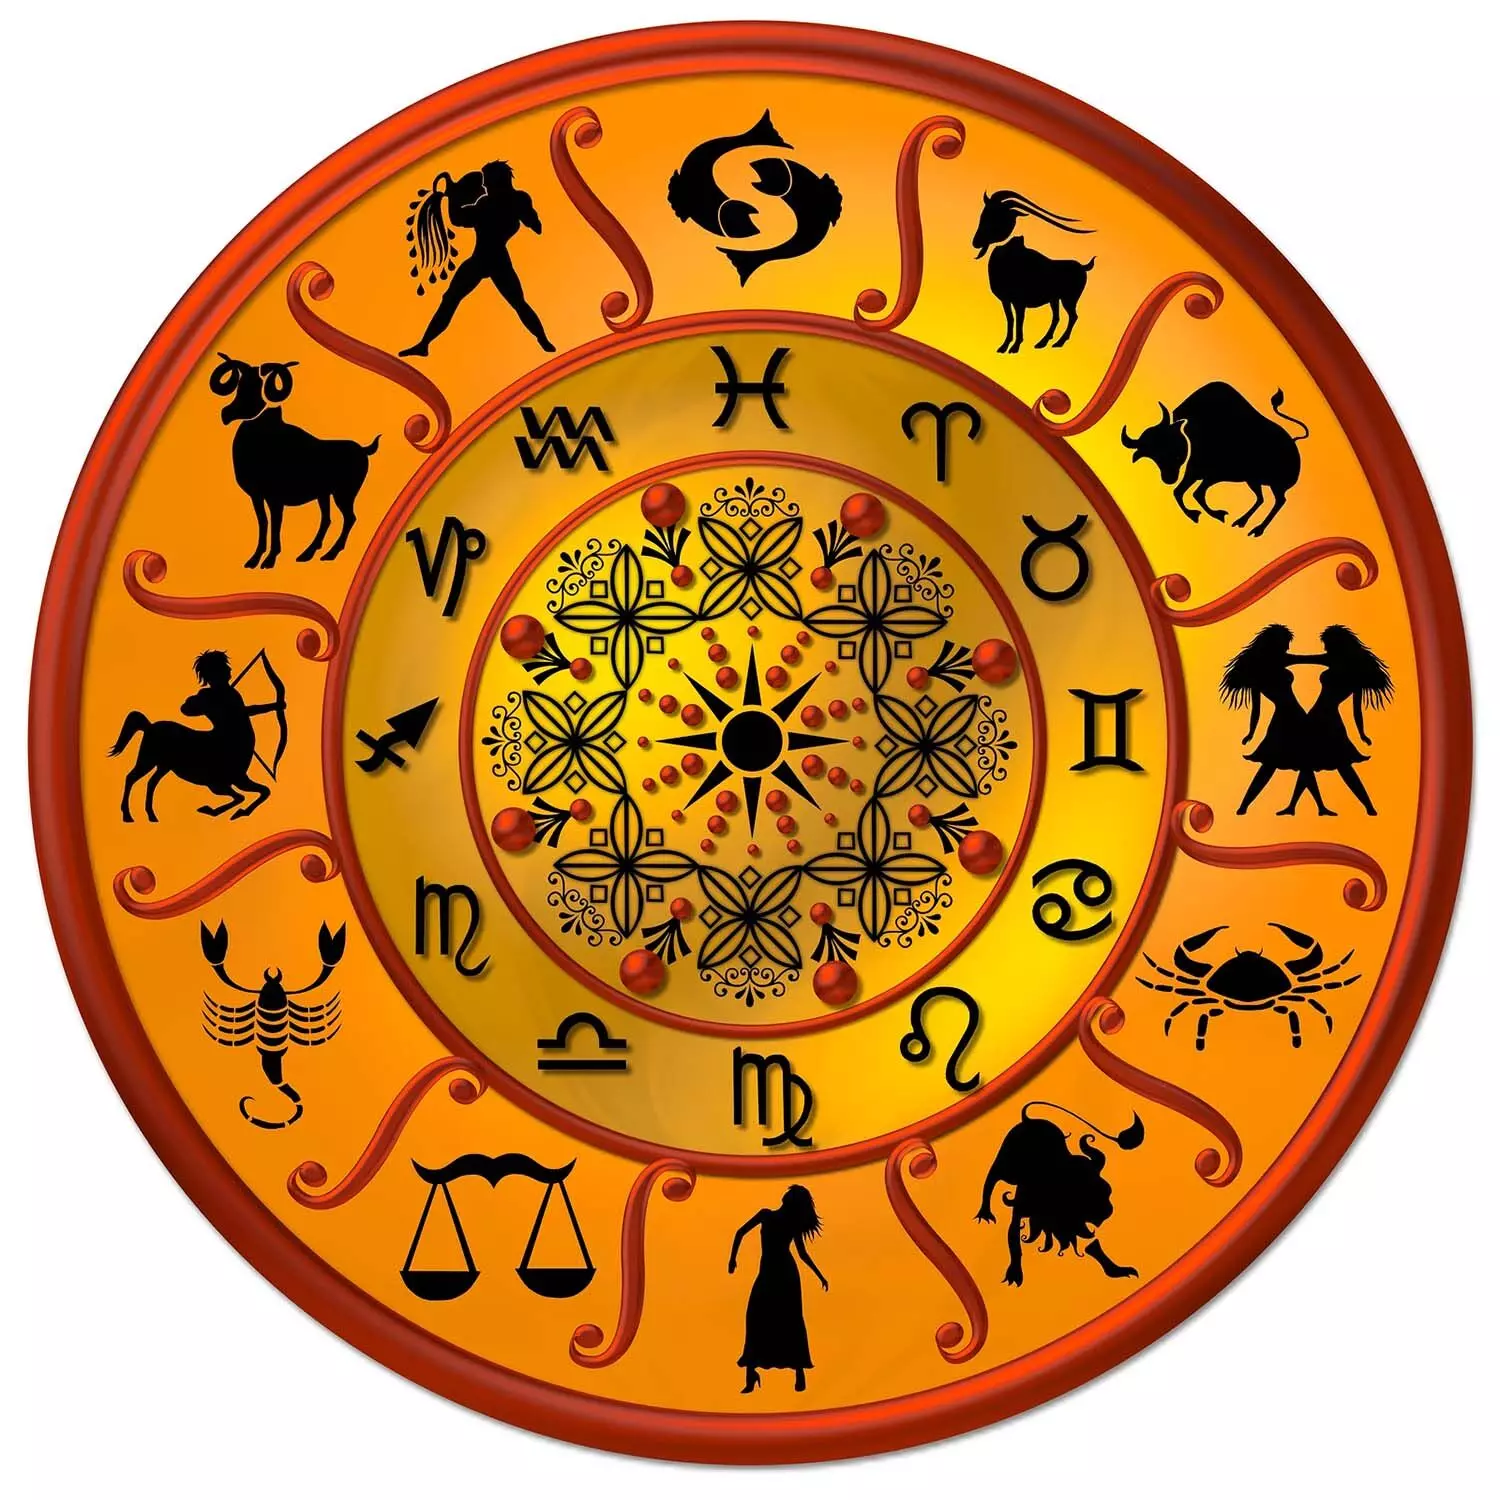 25 July – Know your todays horoscope